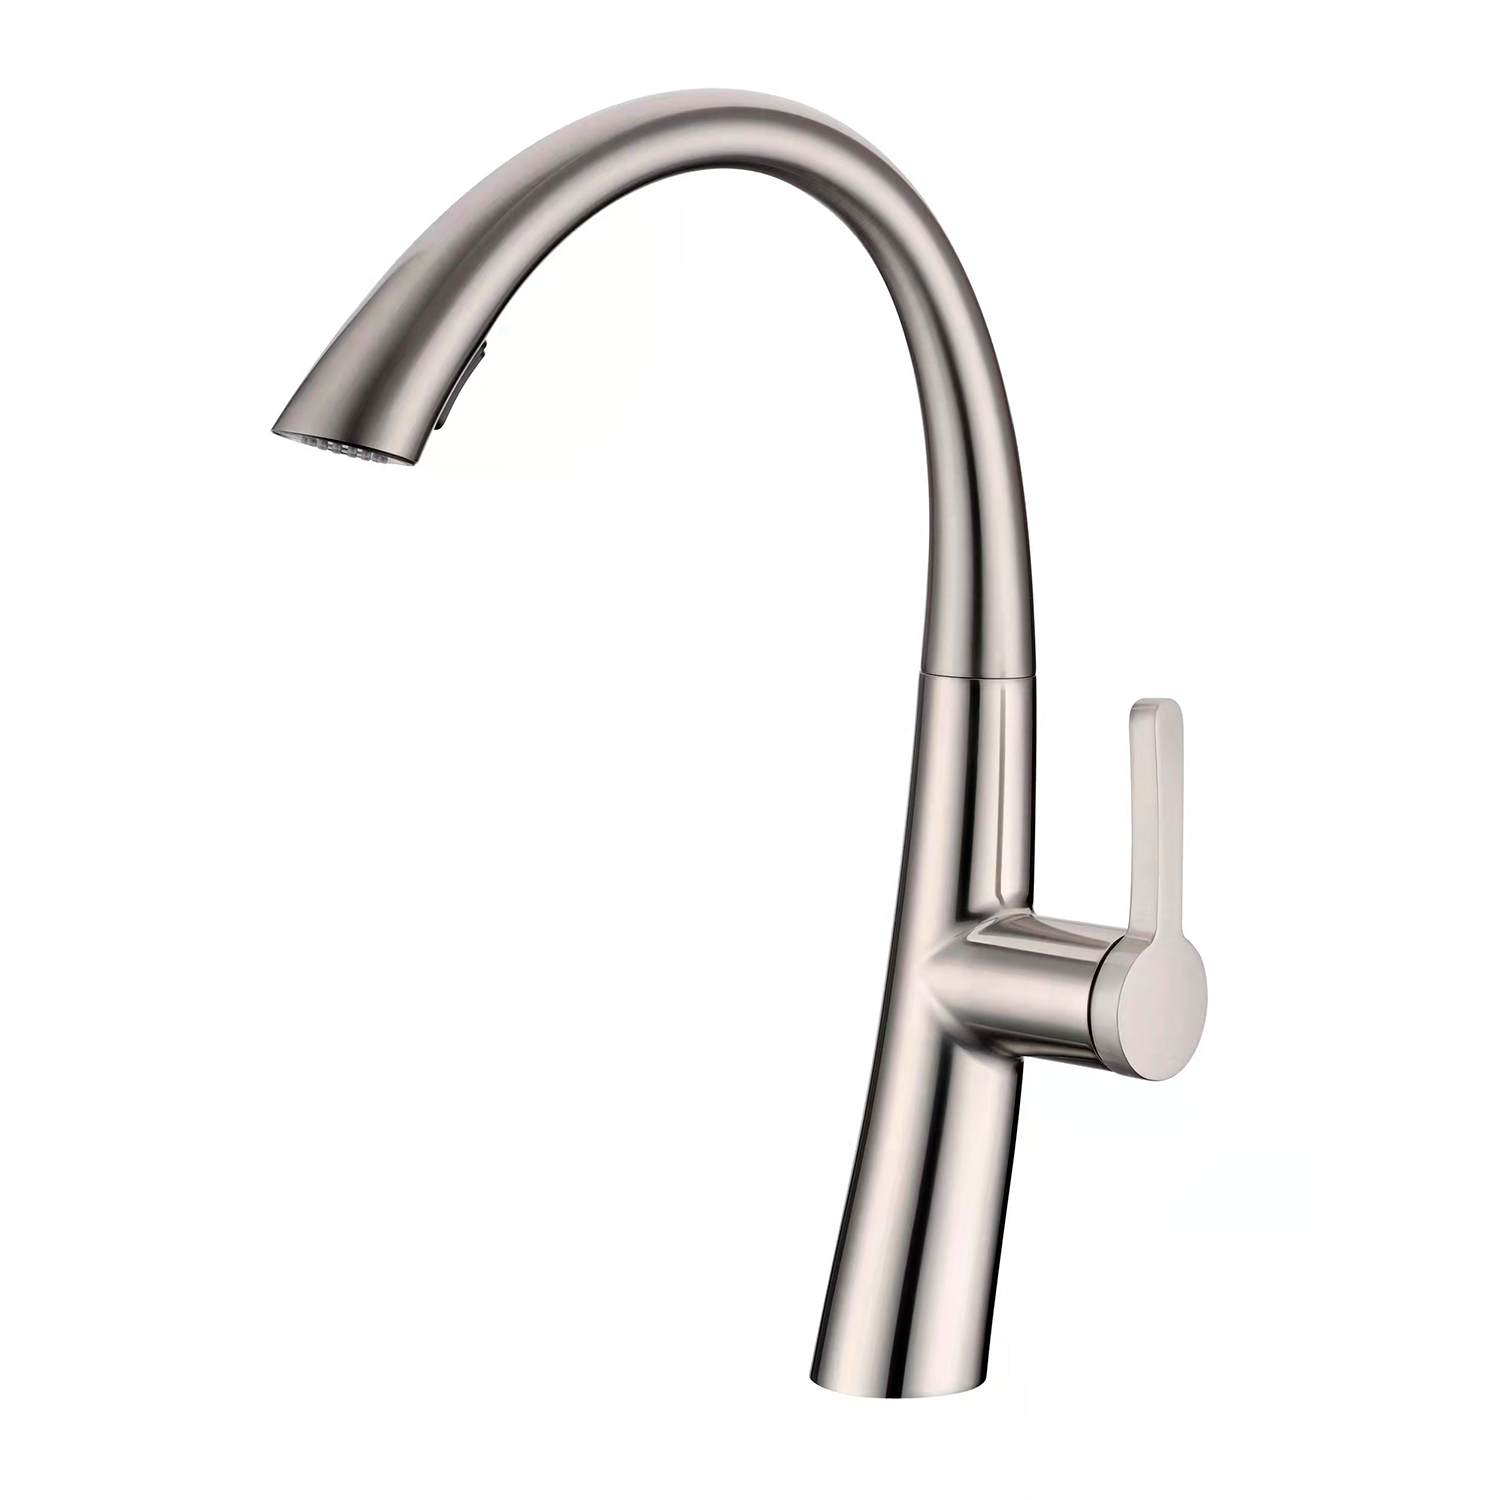 DAX Single Handle Pull Down Kitchen Faucet Brushed Nickel Finish (DAX-6975A-BN)